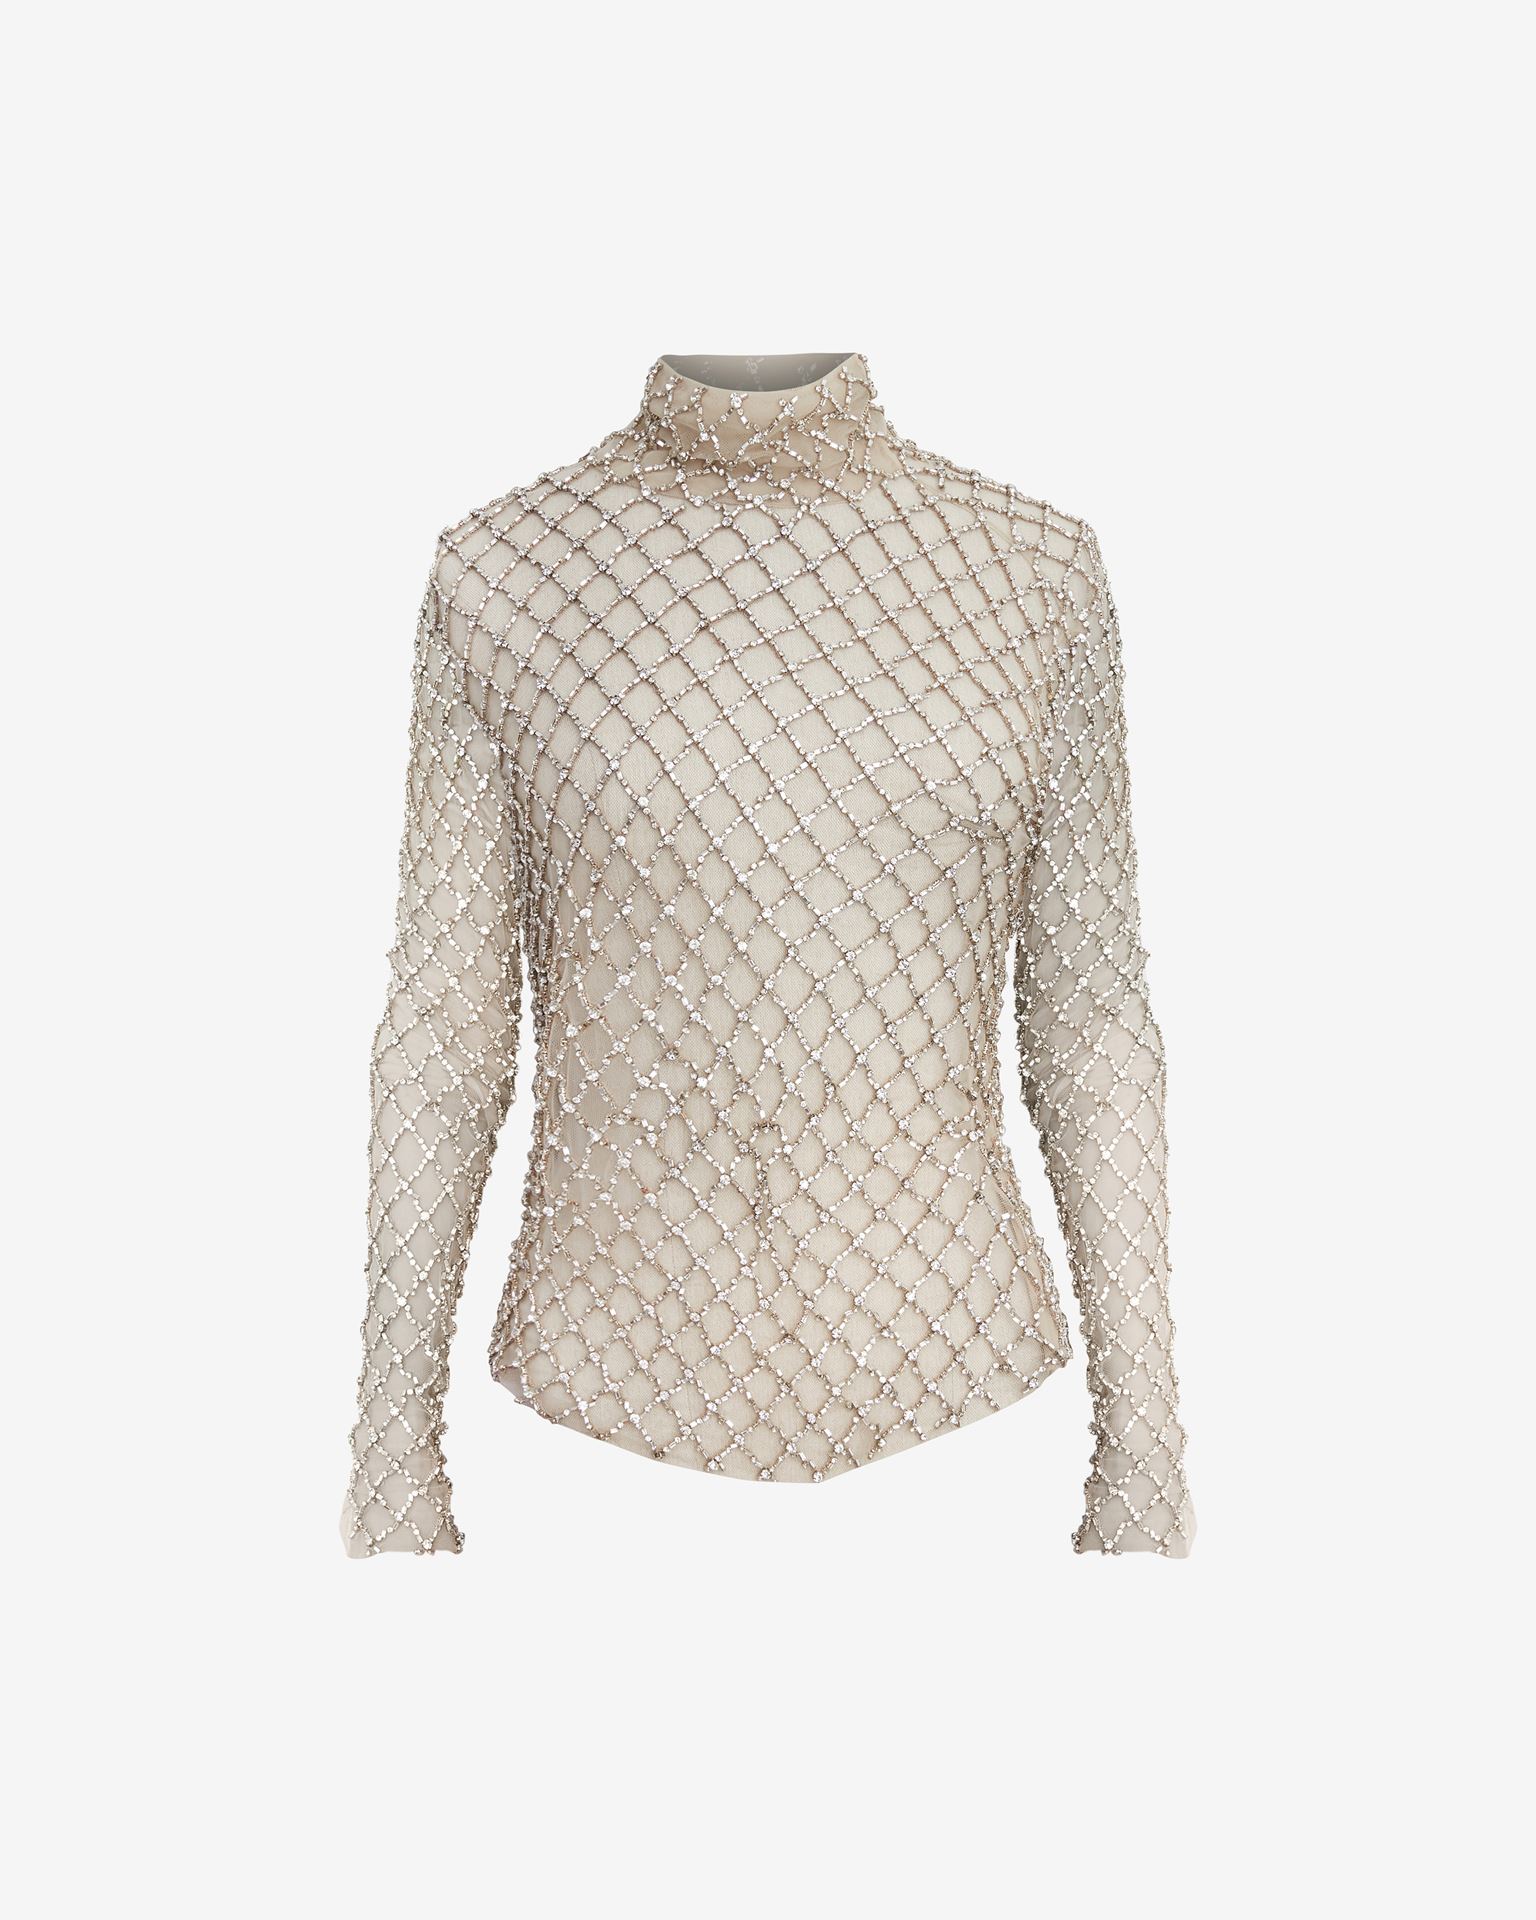 Isabel Marant, Lupita Sequin Embroided Top - Women - Silver